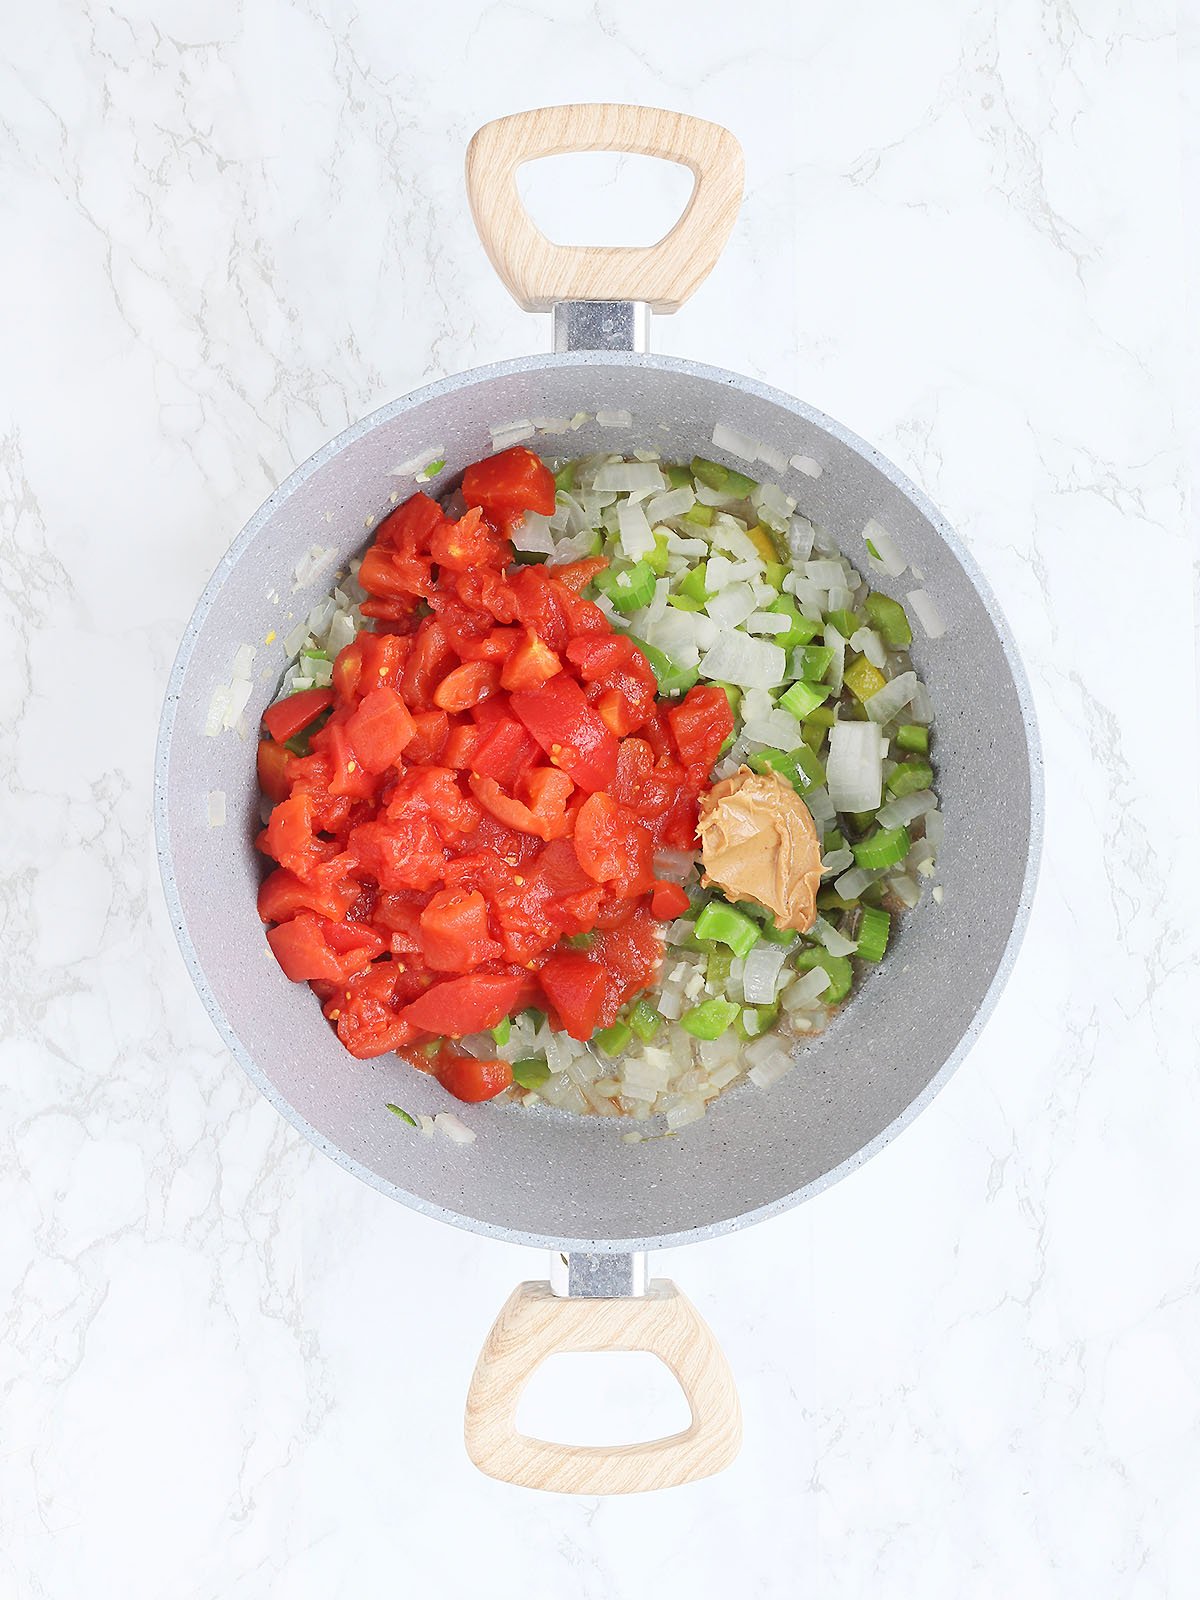 pot with diced tomatoes, diced onions, green bell peppers, and peanut butter